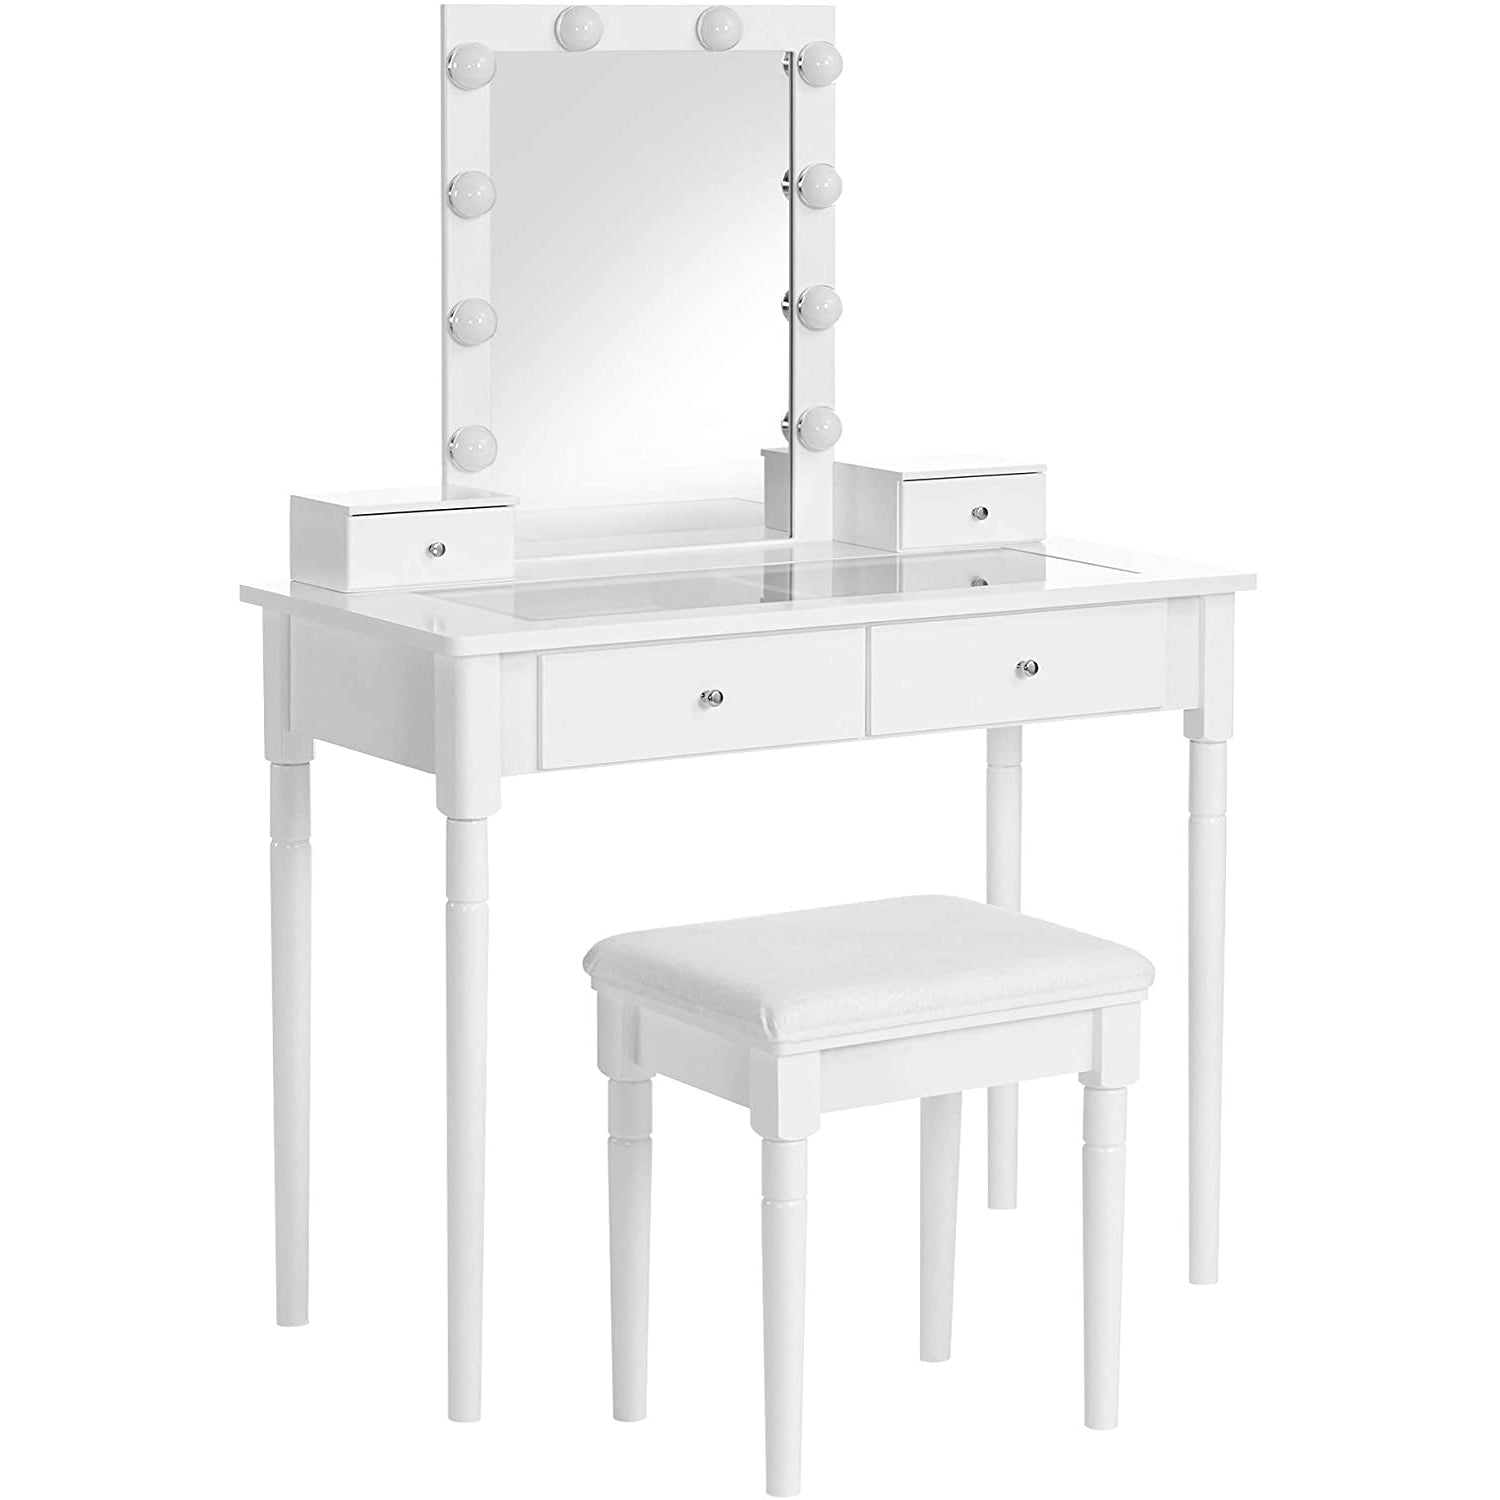 Nancy's Neenah Dressing Table Set - Padded Stool - 10 Dimmable Lamps - 4 Drawers - Transparent Table Top - White